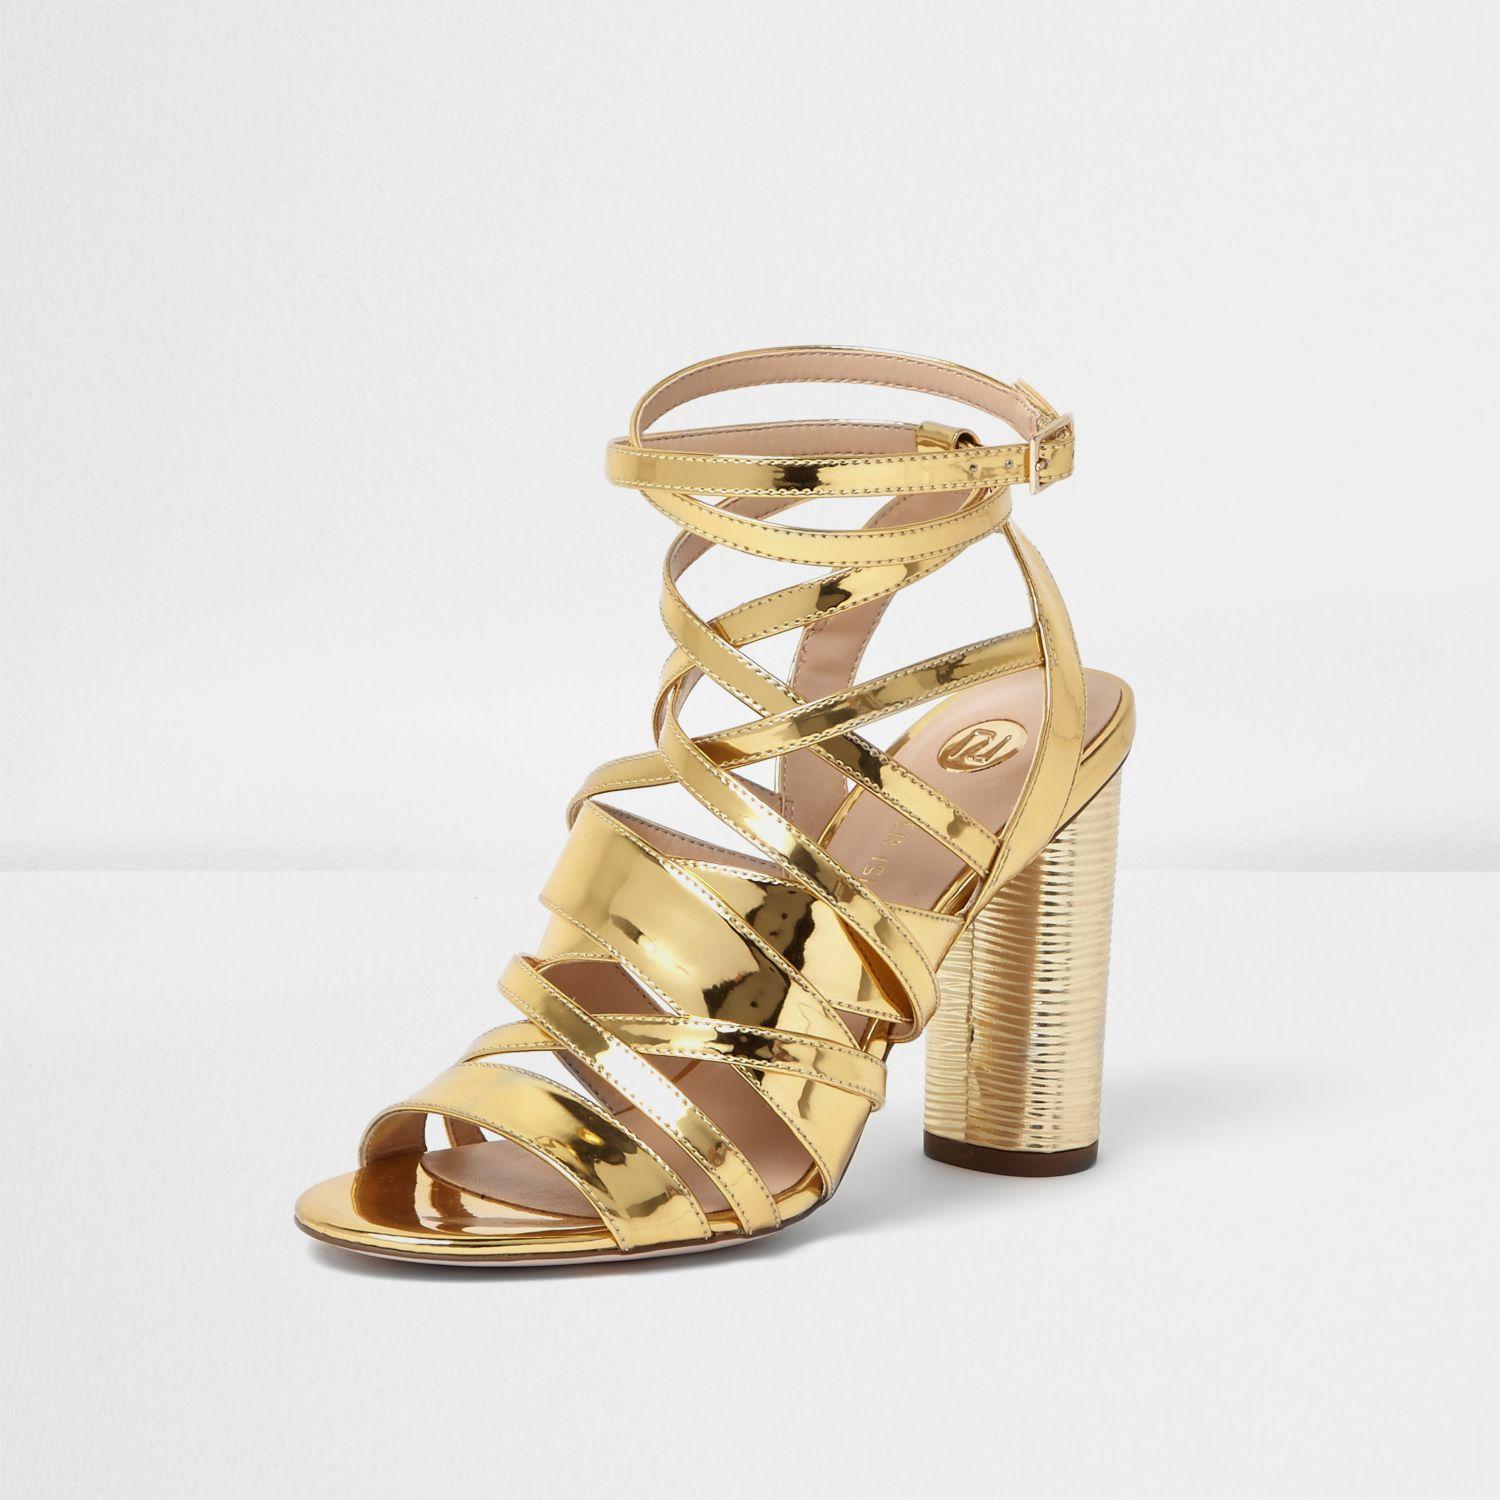 River Island Patent Gold Strappy Heeled Sandals in Metallic - Lyst